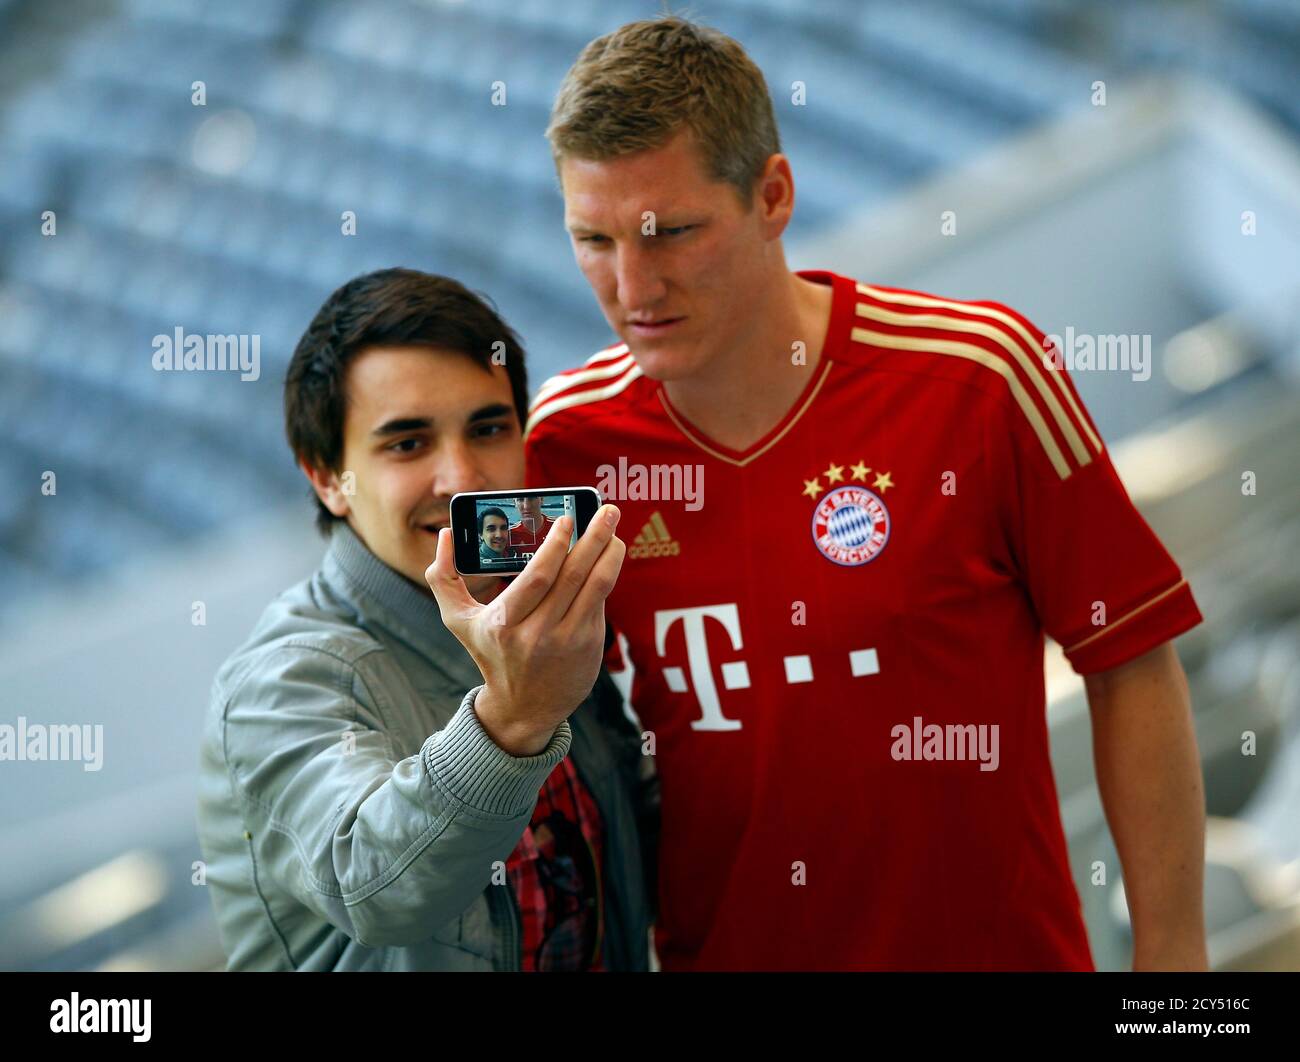 Bastian Schweinsteiger of FC Bayern Munich poses with a supporter after the  presentation of the club's new soccer jersey in Munich April 19, 2011. Bayern  Munich extended its contract with the German